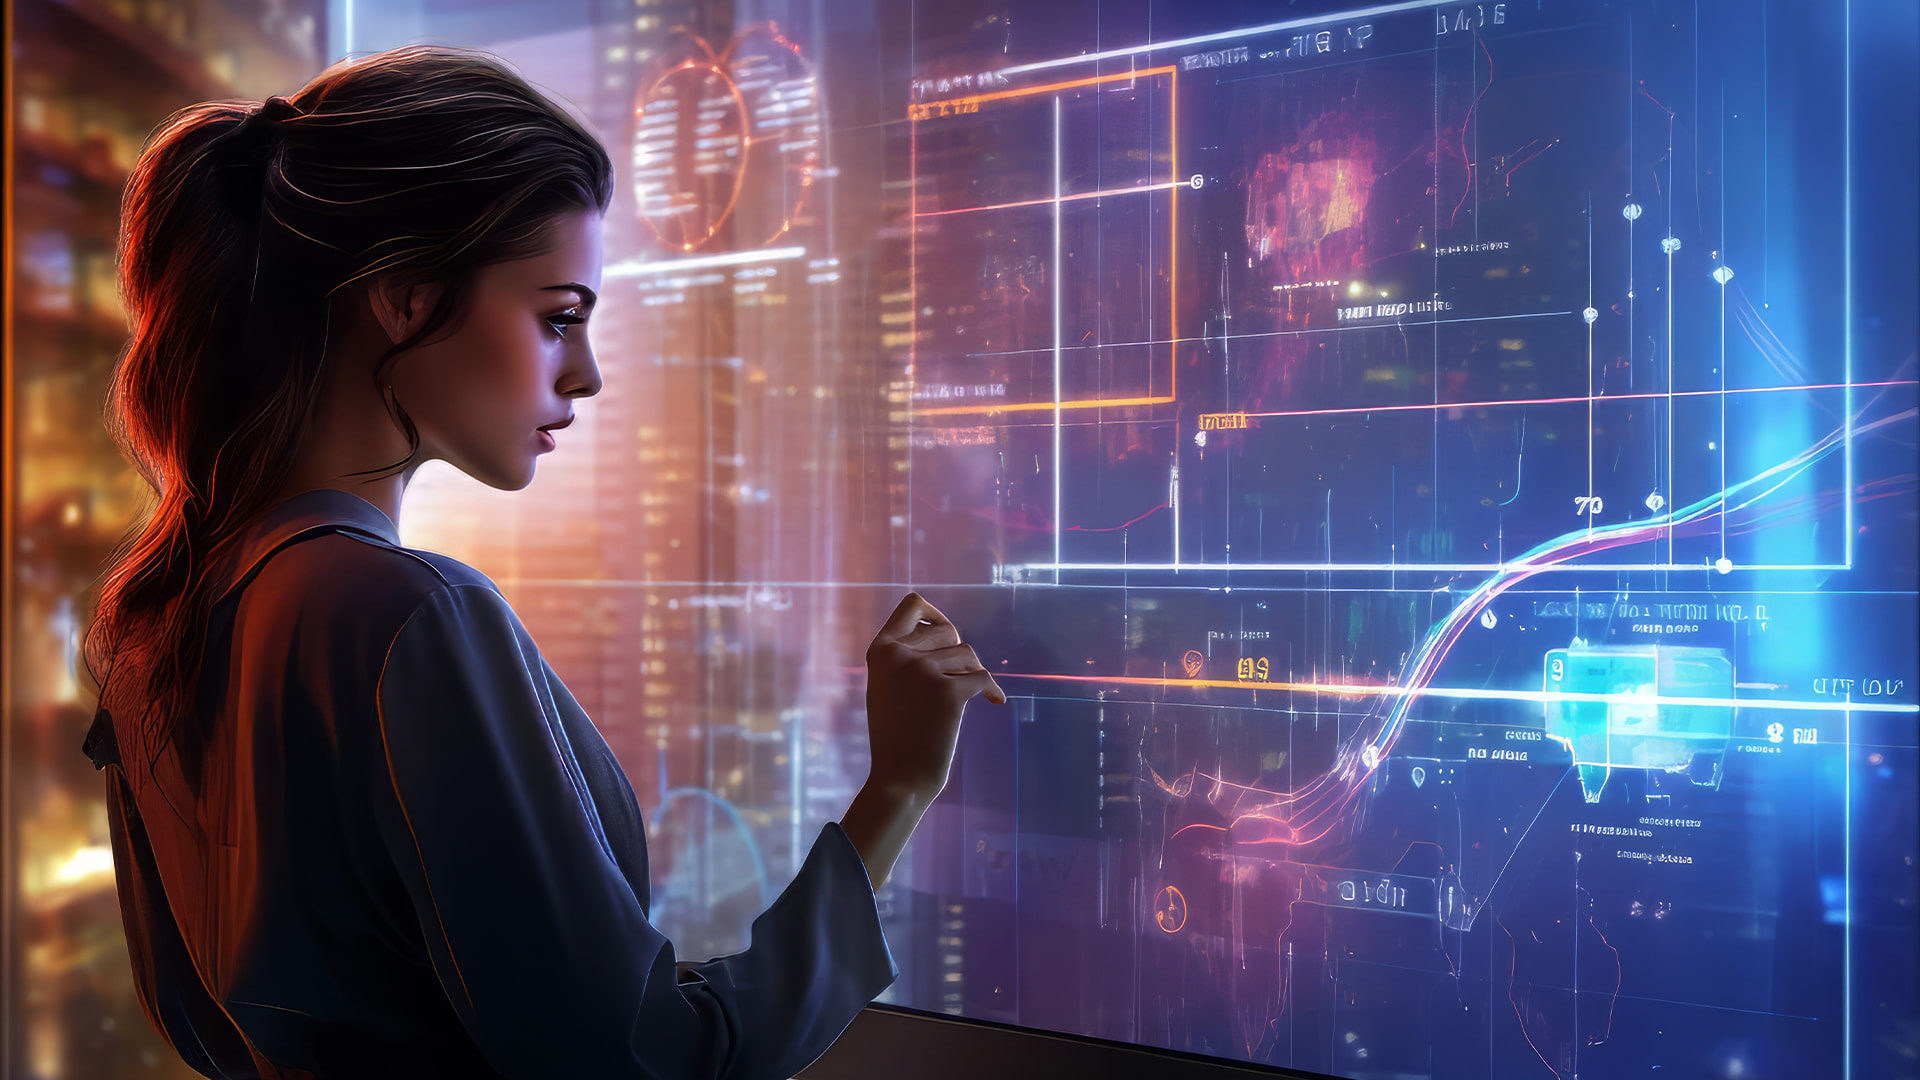 A Woman interacting with Spatial Computing Technology